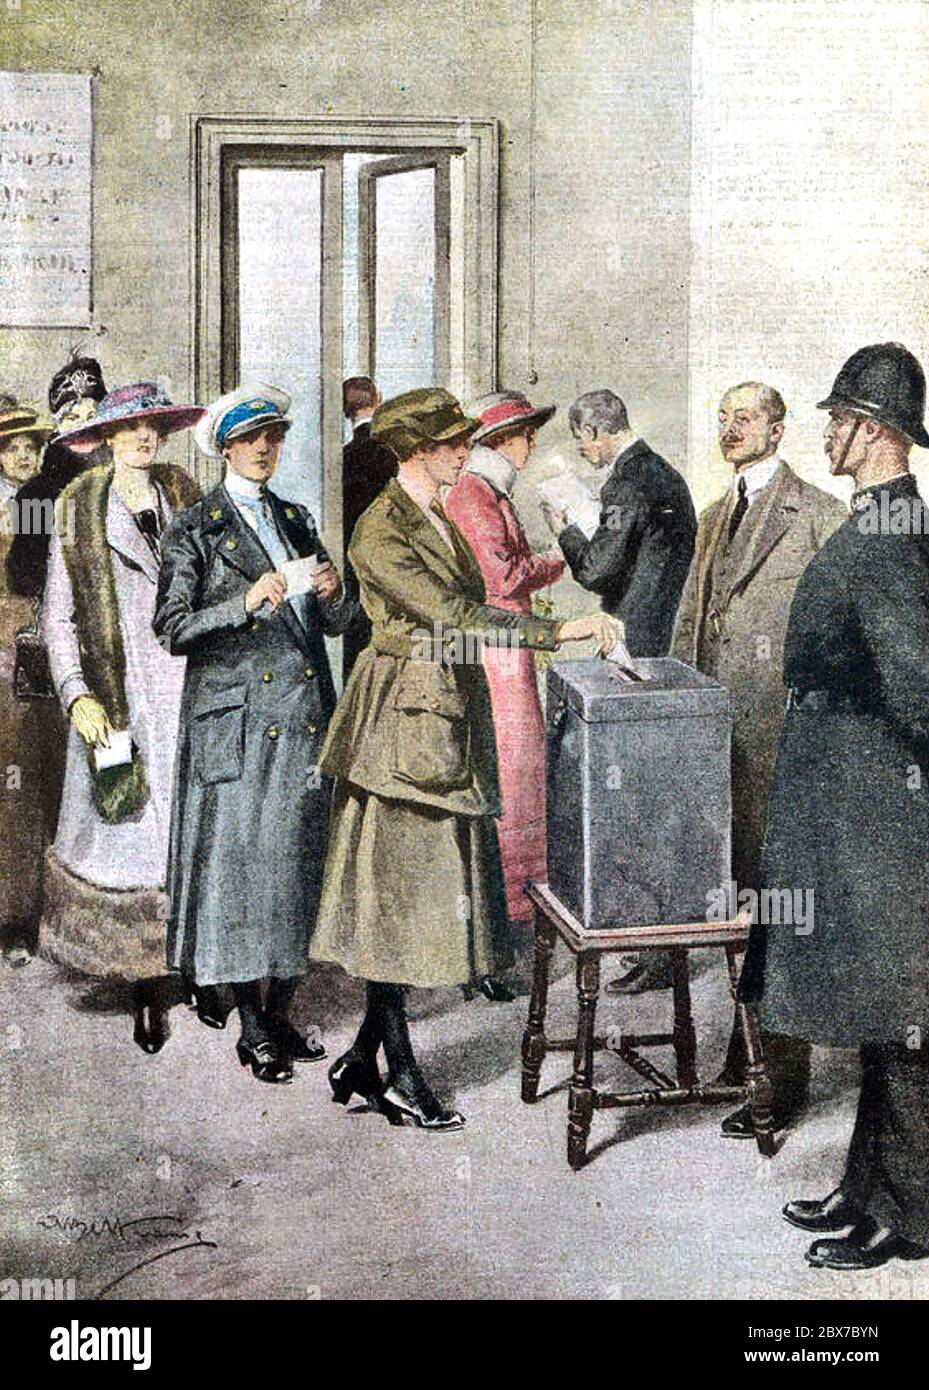 BRITISH GENERAL ELECTION 1918. First election in which women over the age of 30 and men over 21, could vote. Illustration from a French magazine. Stock Photo